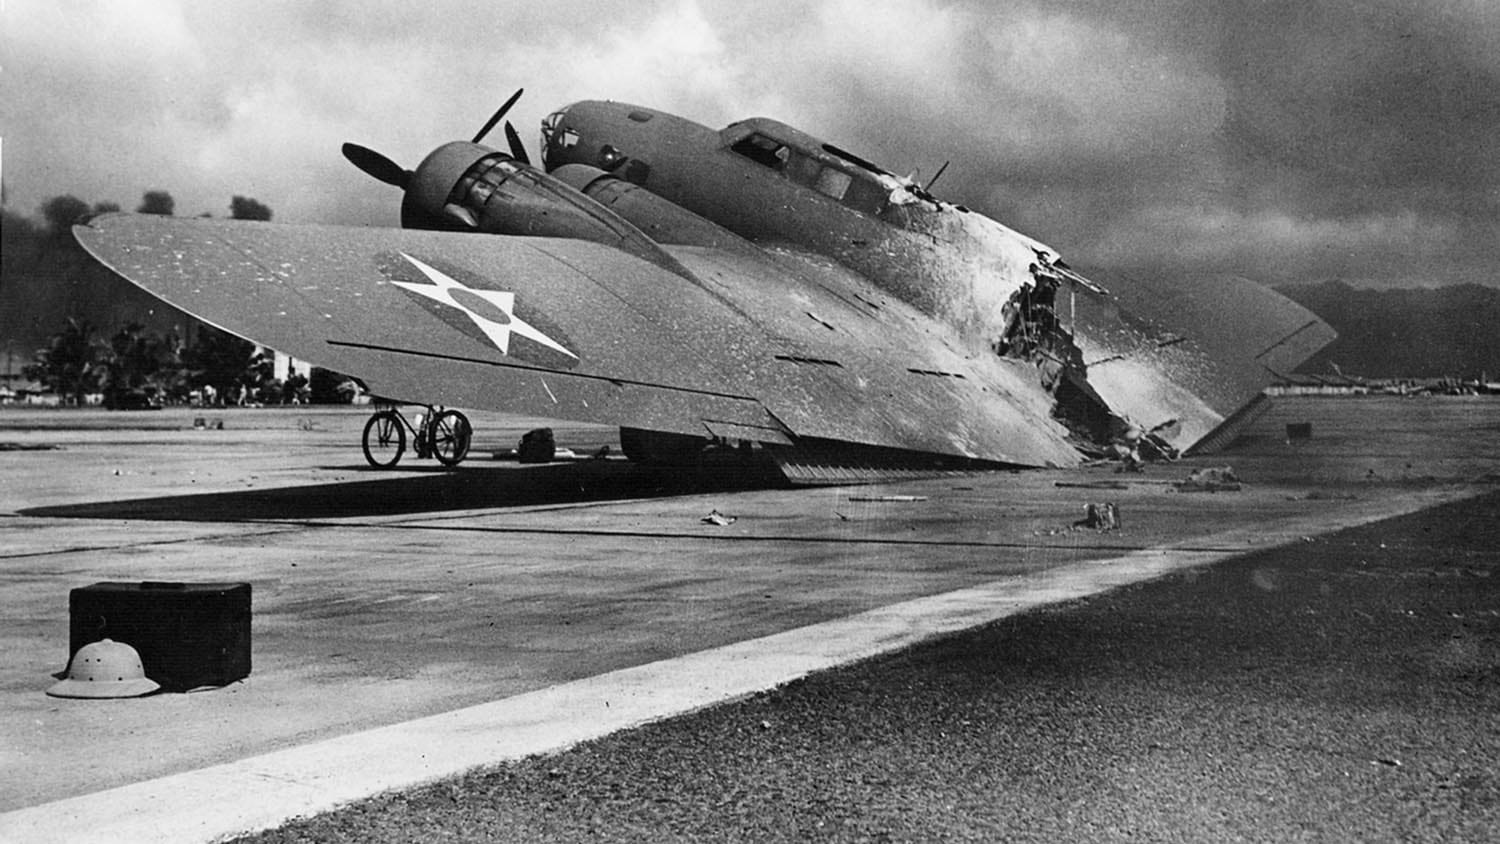 A burned U.S. Army Air Forces Boeing B-17C Flying Fortress rests near Hangar 5, Hickam Field, Oahu, Hawaii on Dec. 7, 1941. Photo: National Archives.